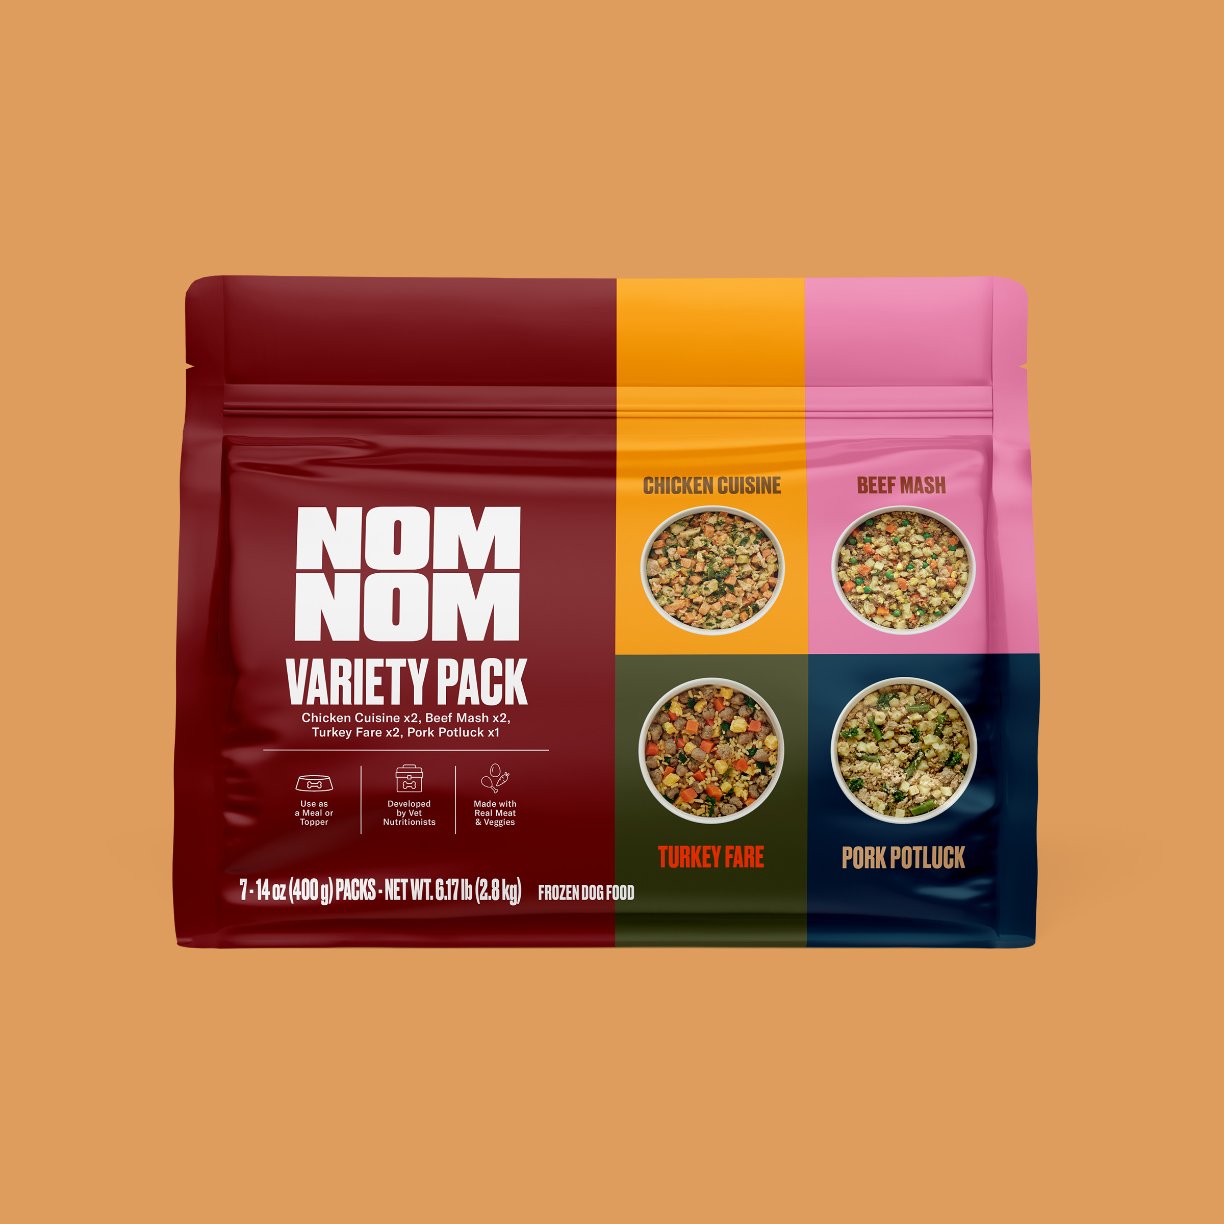 Nom Nom’s Branding is So Sophisticated, You’d Be Forgiven for Not Realizing It’s Dog Food